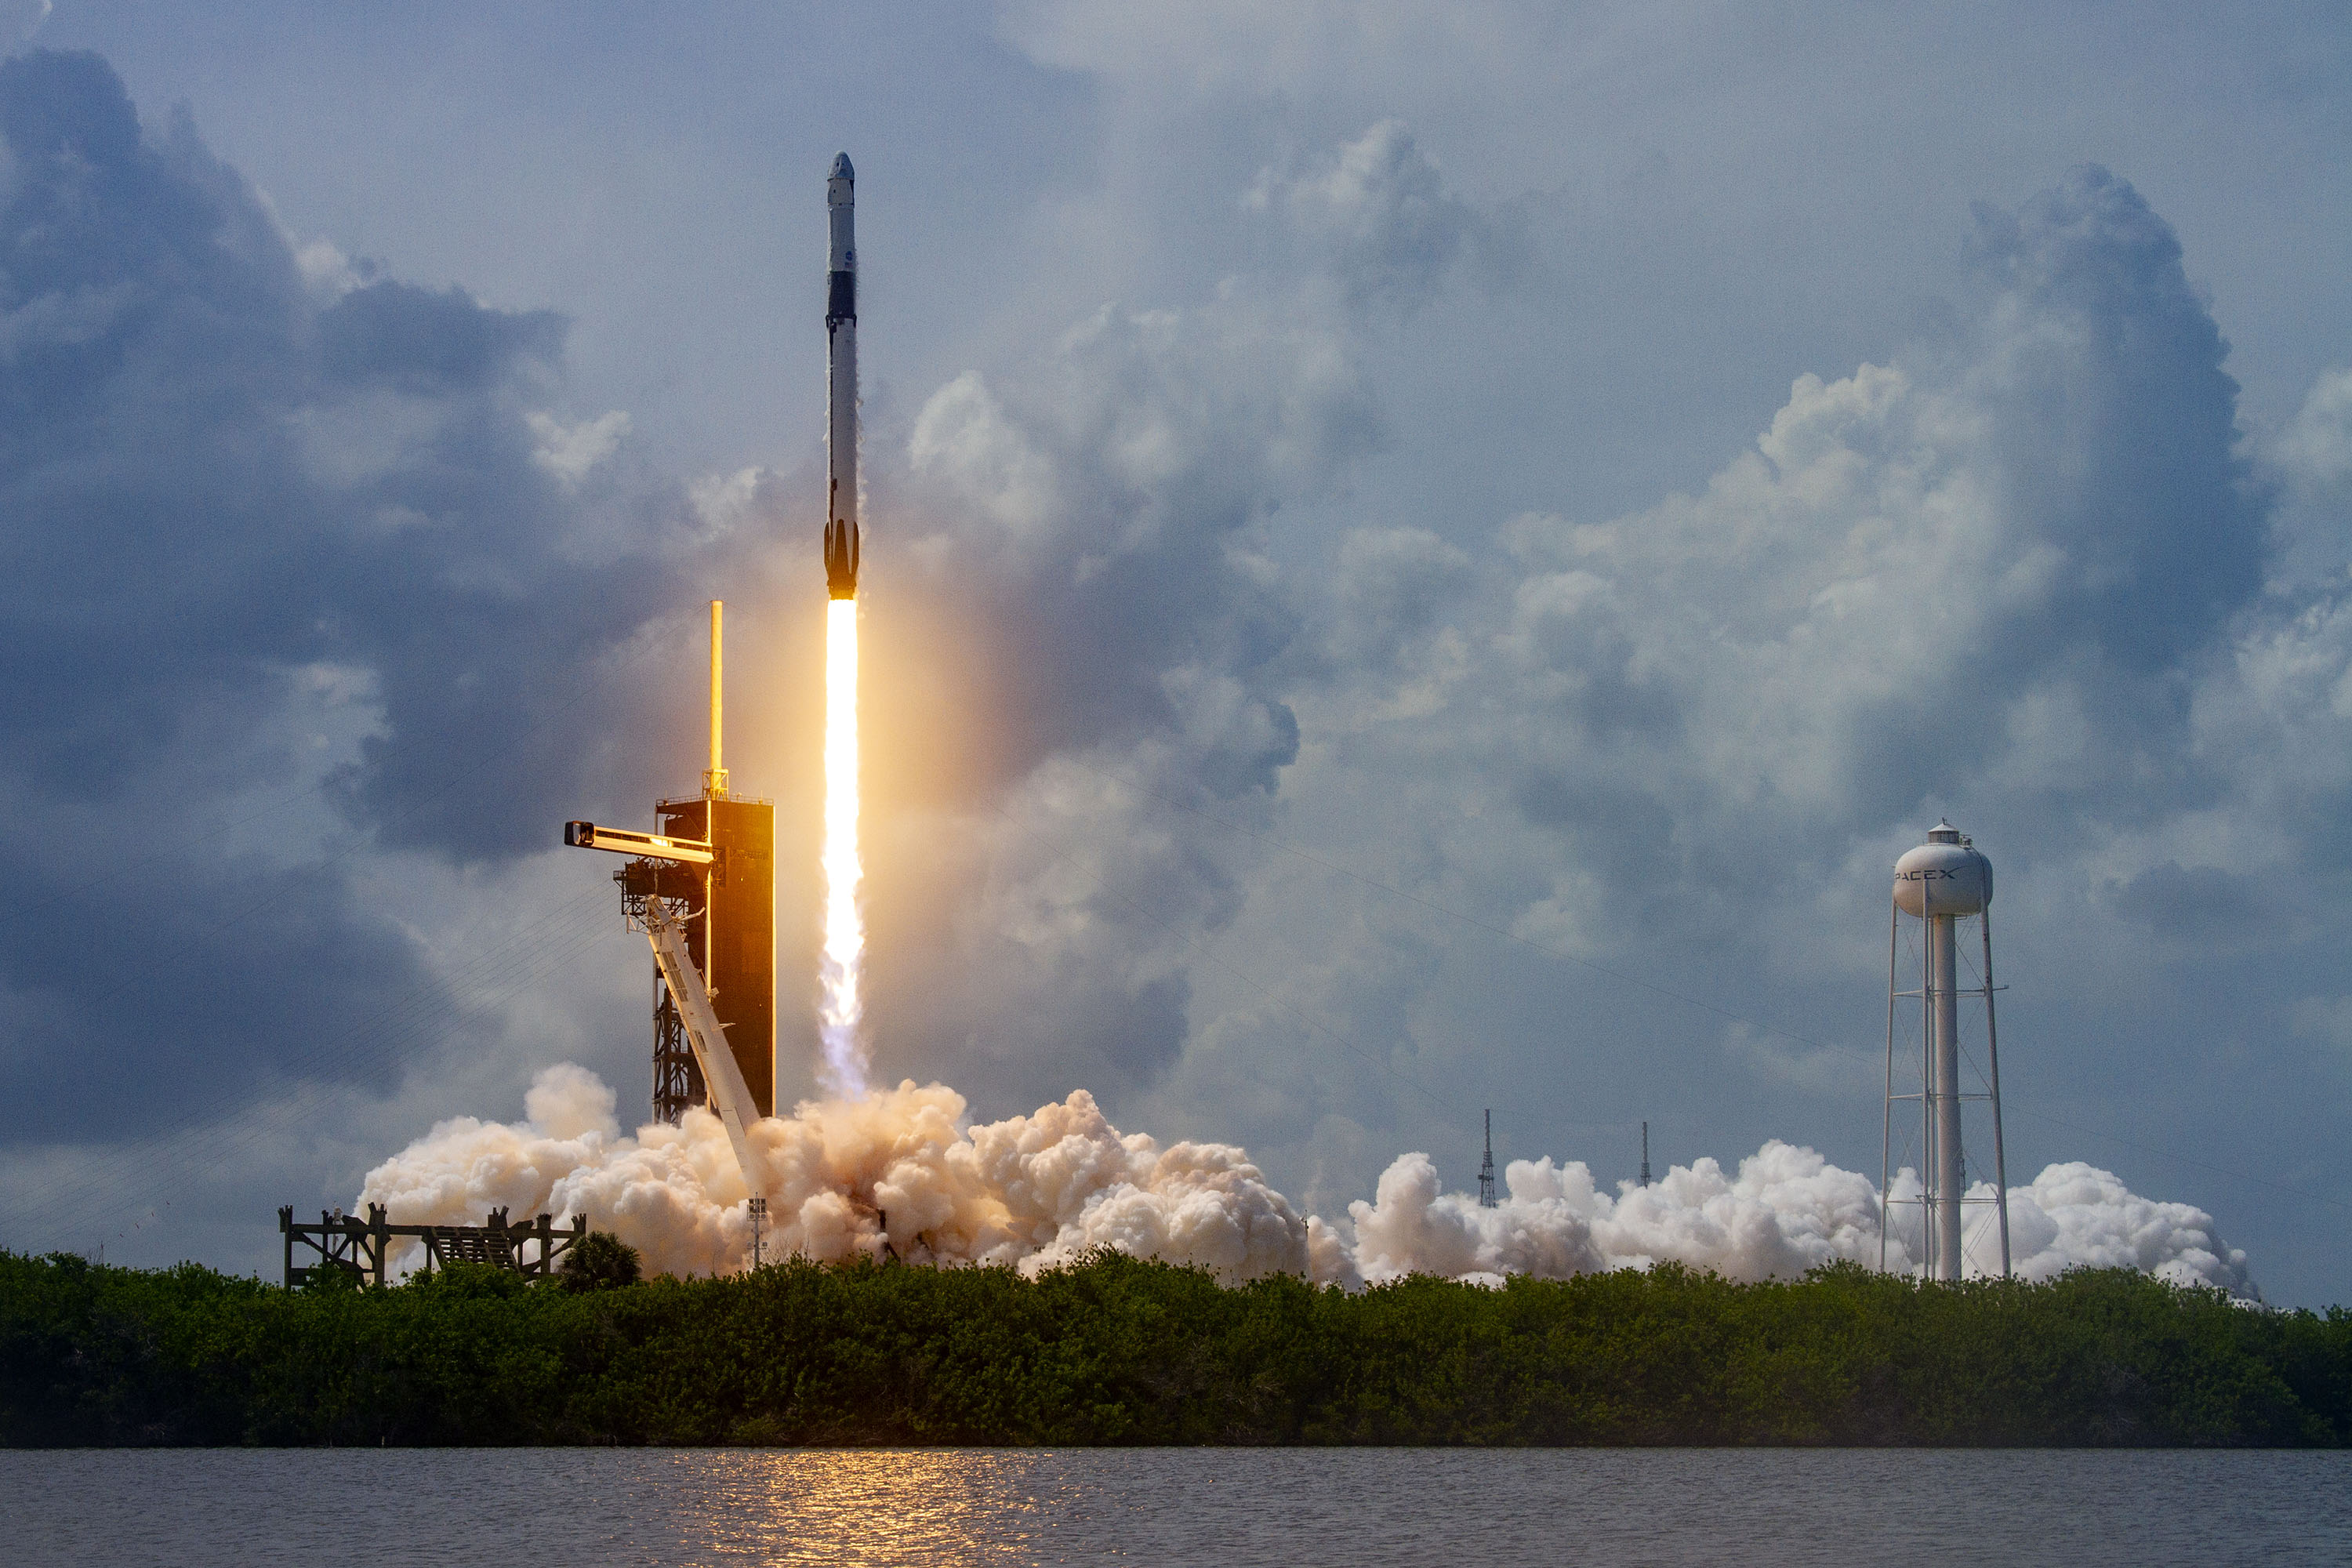 In this SpaceX handout image, a Falcon 9 rocket carrying the company's Crew Dragon spacecraft launches on May 30, 2020, at the Kennedy Space Center, Cape Canaveral, Florida. (Photo: SpaceX via Getty Images)